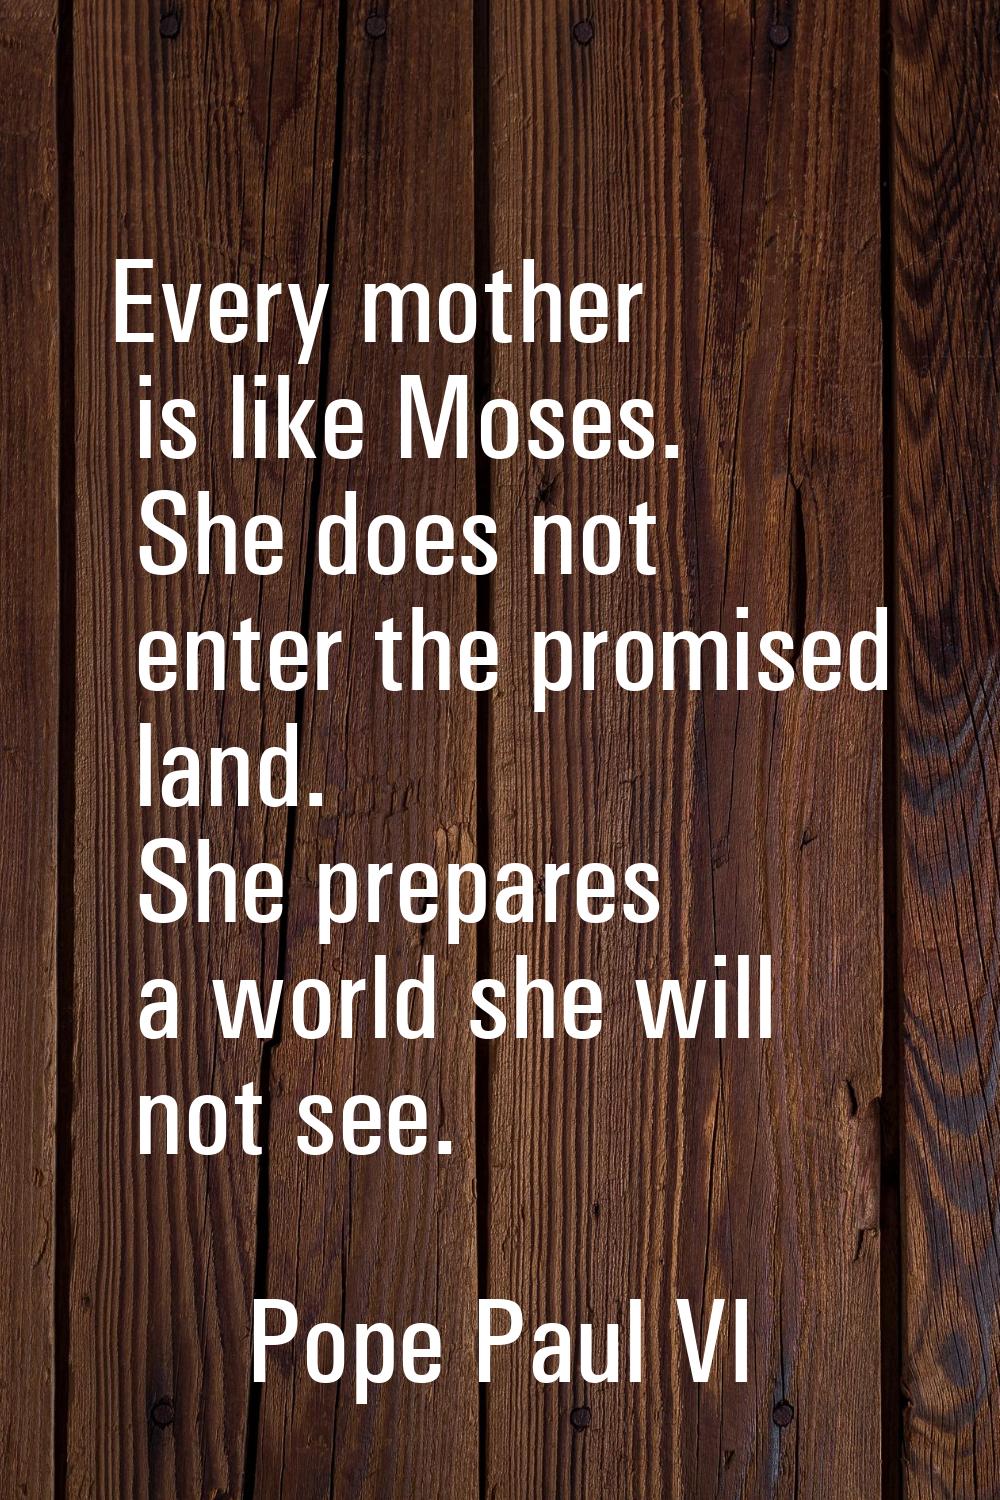 Every mother is like Moses. She does not enter the promised land. She prepares a world she will not